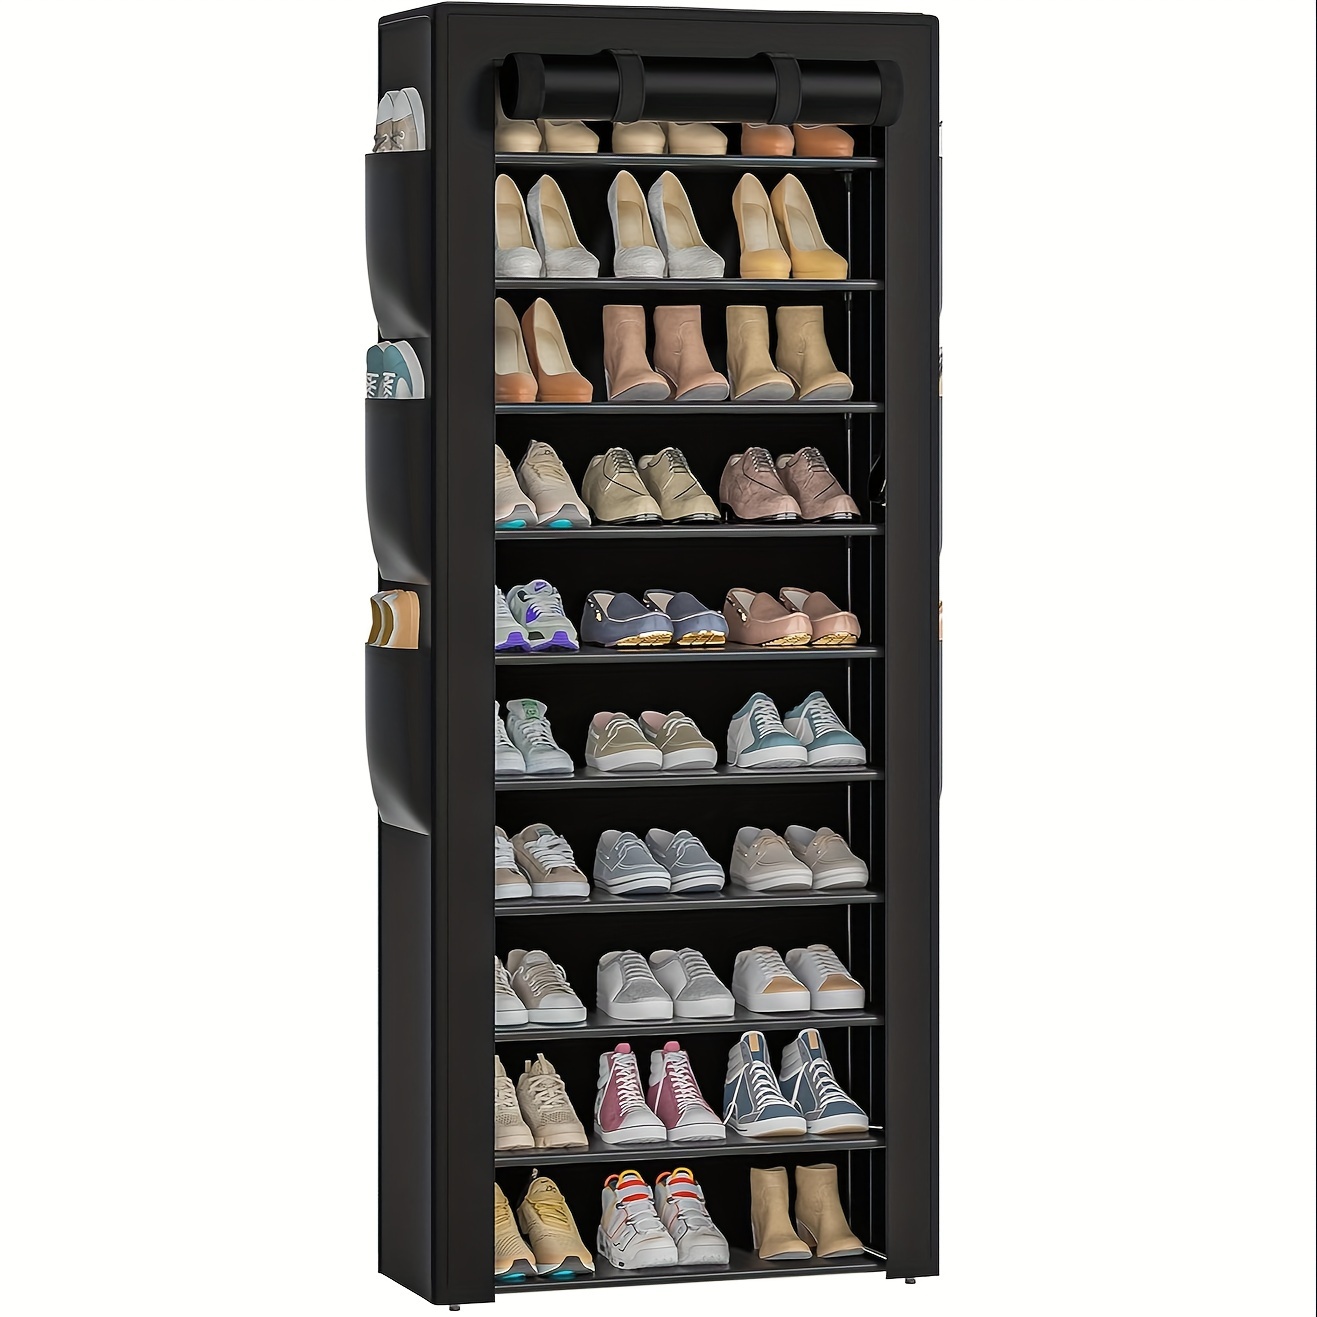 

10 Tier Shoe Rack With Covers, Large Capacity Stackable Tall Shoe Shelf Storage To 36-41 Pairs Shoes And Boots Sturdy Metal Free Standing Organizer For Closet Entryway Garage Bedroom